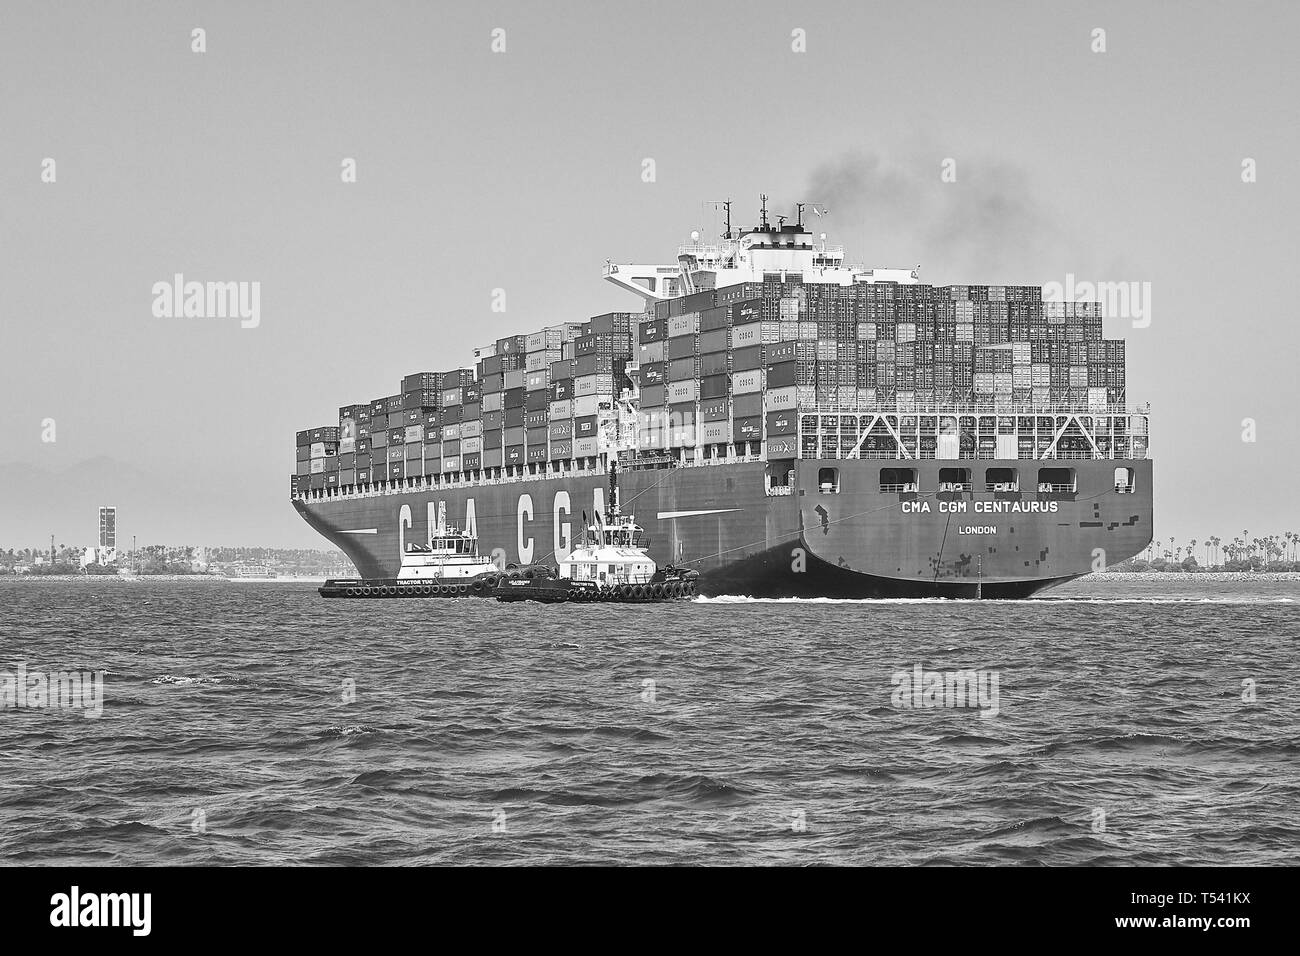 Black And White Photo Of Container Ship, CMA CGM CENTAURUS, Being Turned Through 180 Degrees By 2 Tugs Before Docking In Long Beach, California, USA Stock Photo